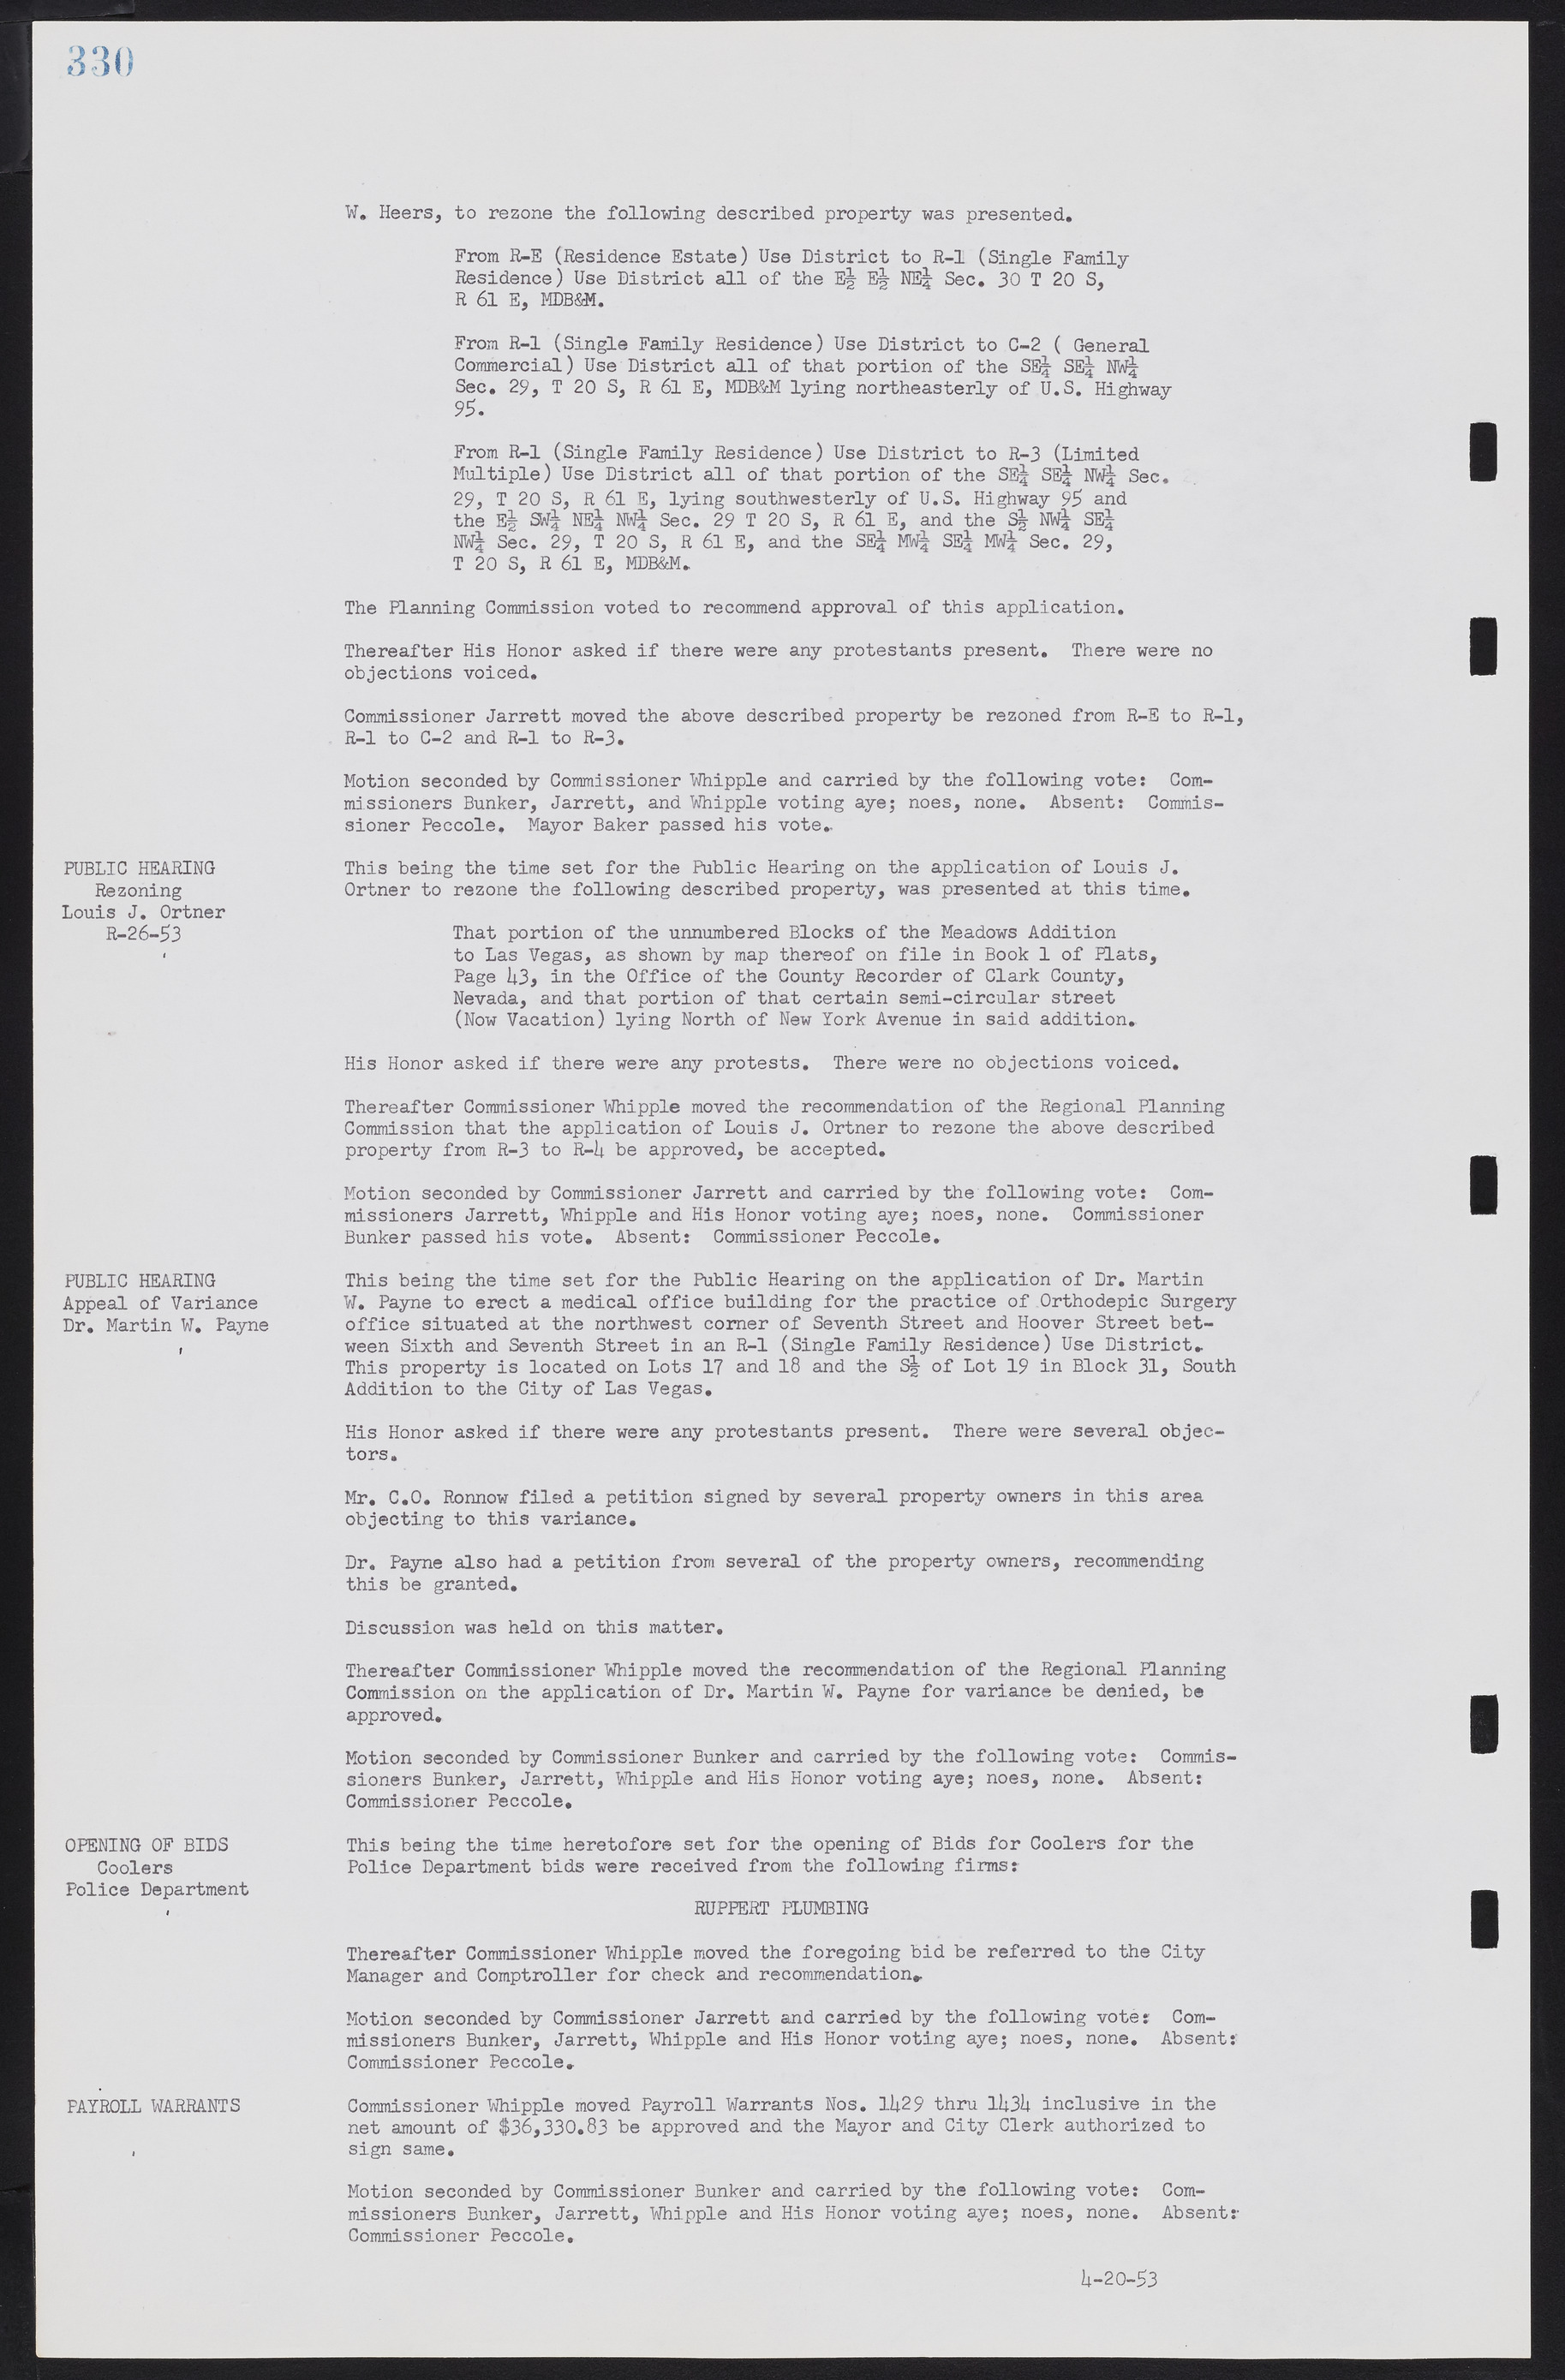 Las Vegas City Commission Minutes, May 26, 1952 to February 17, 1954, lvc000008-358